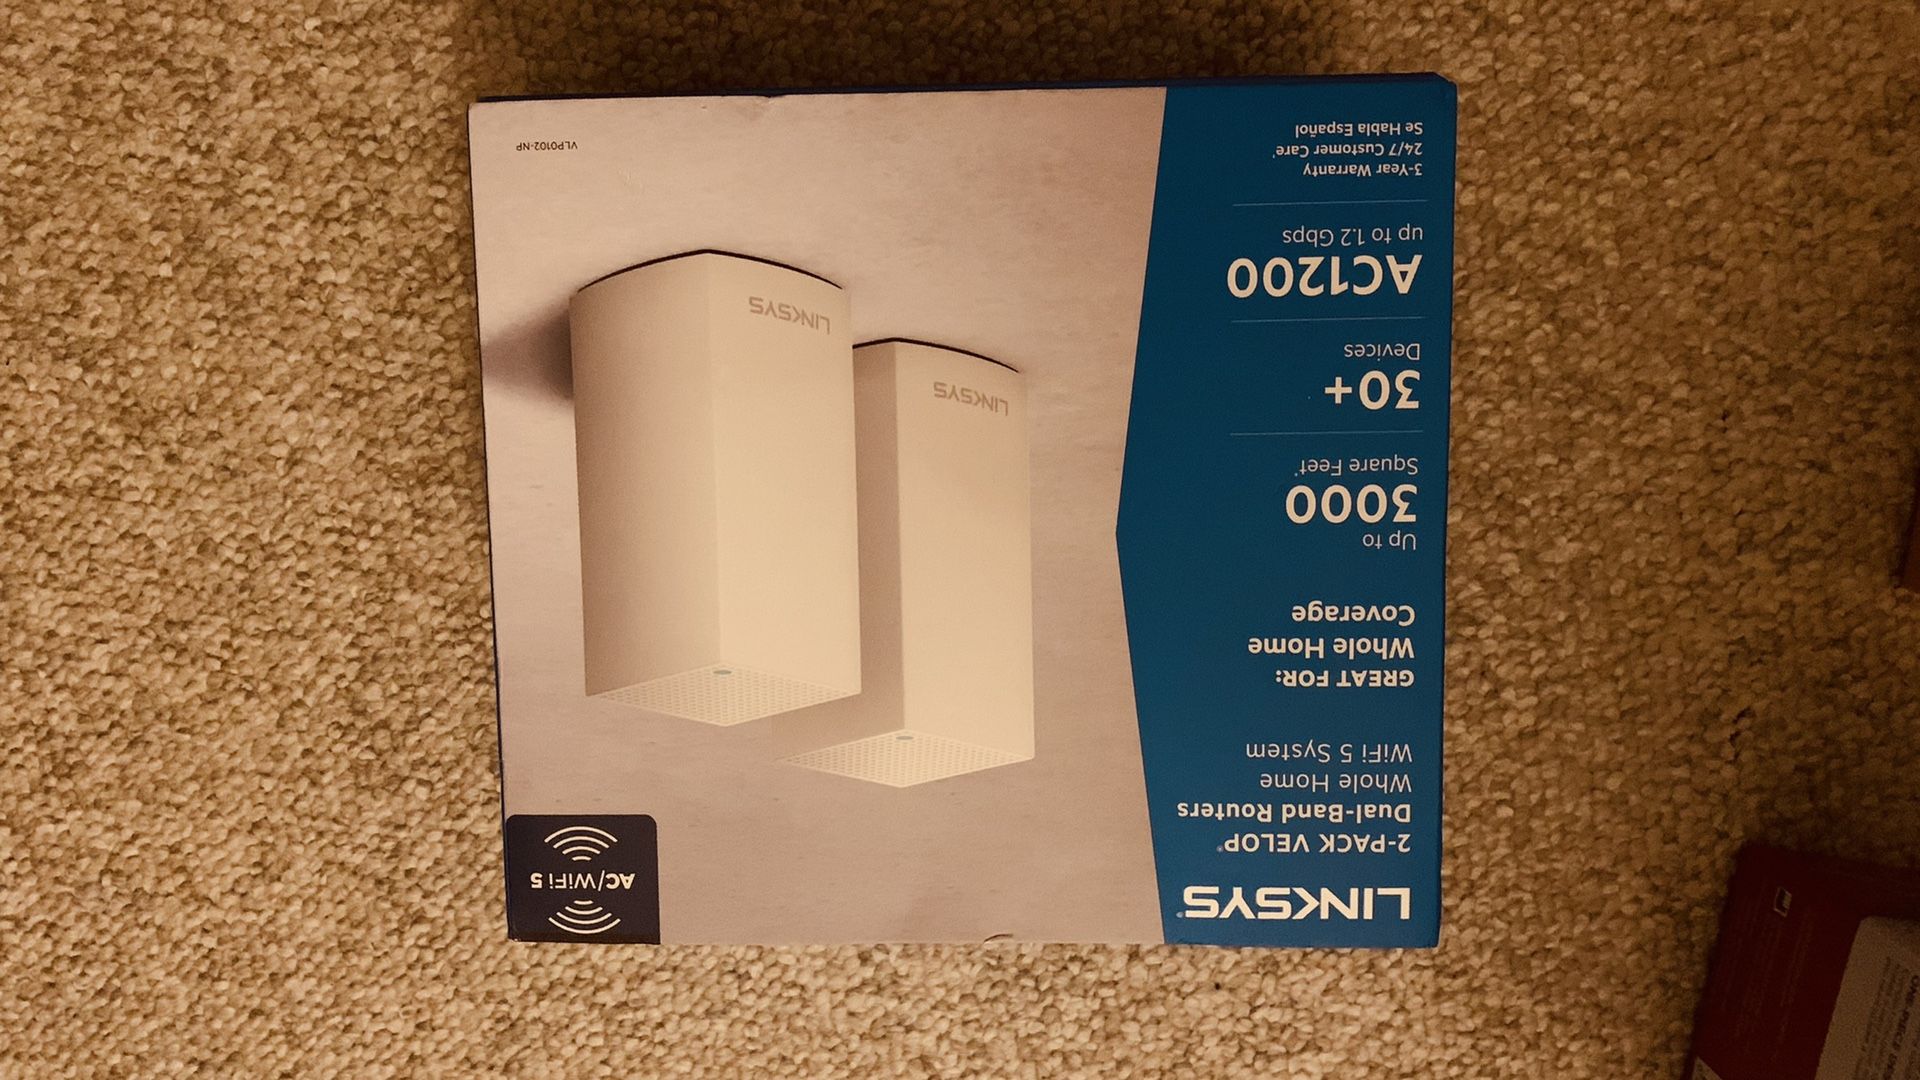 Linksys 2 pk Velop Dual Band Routers